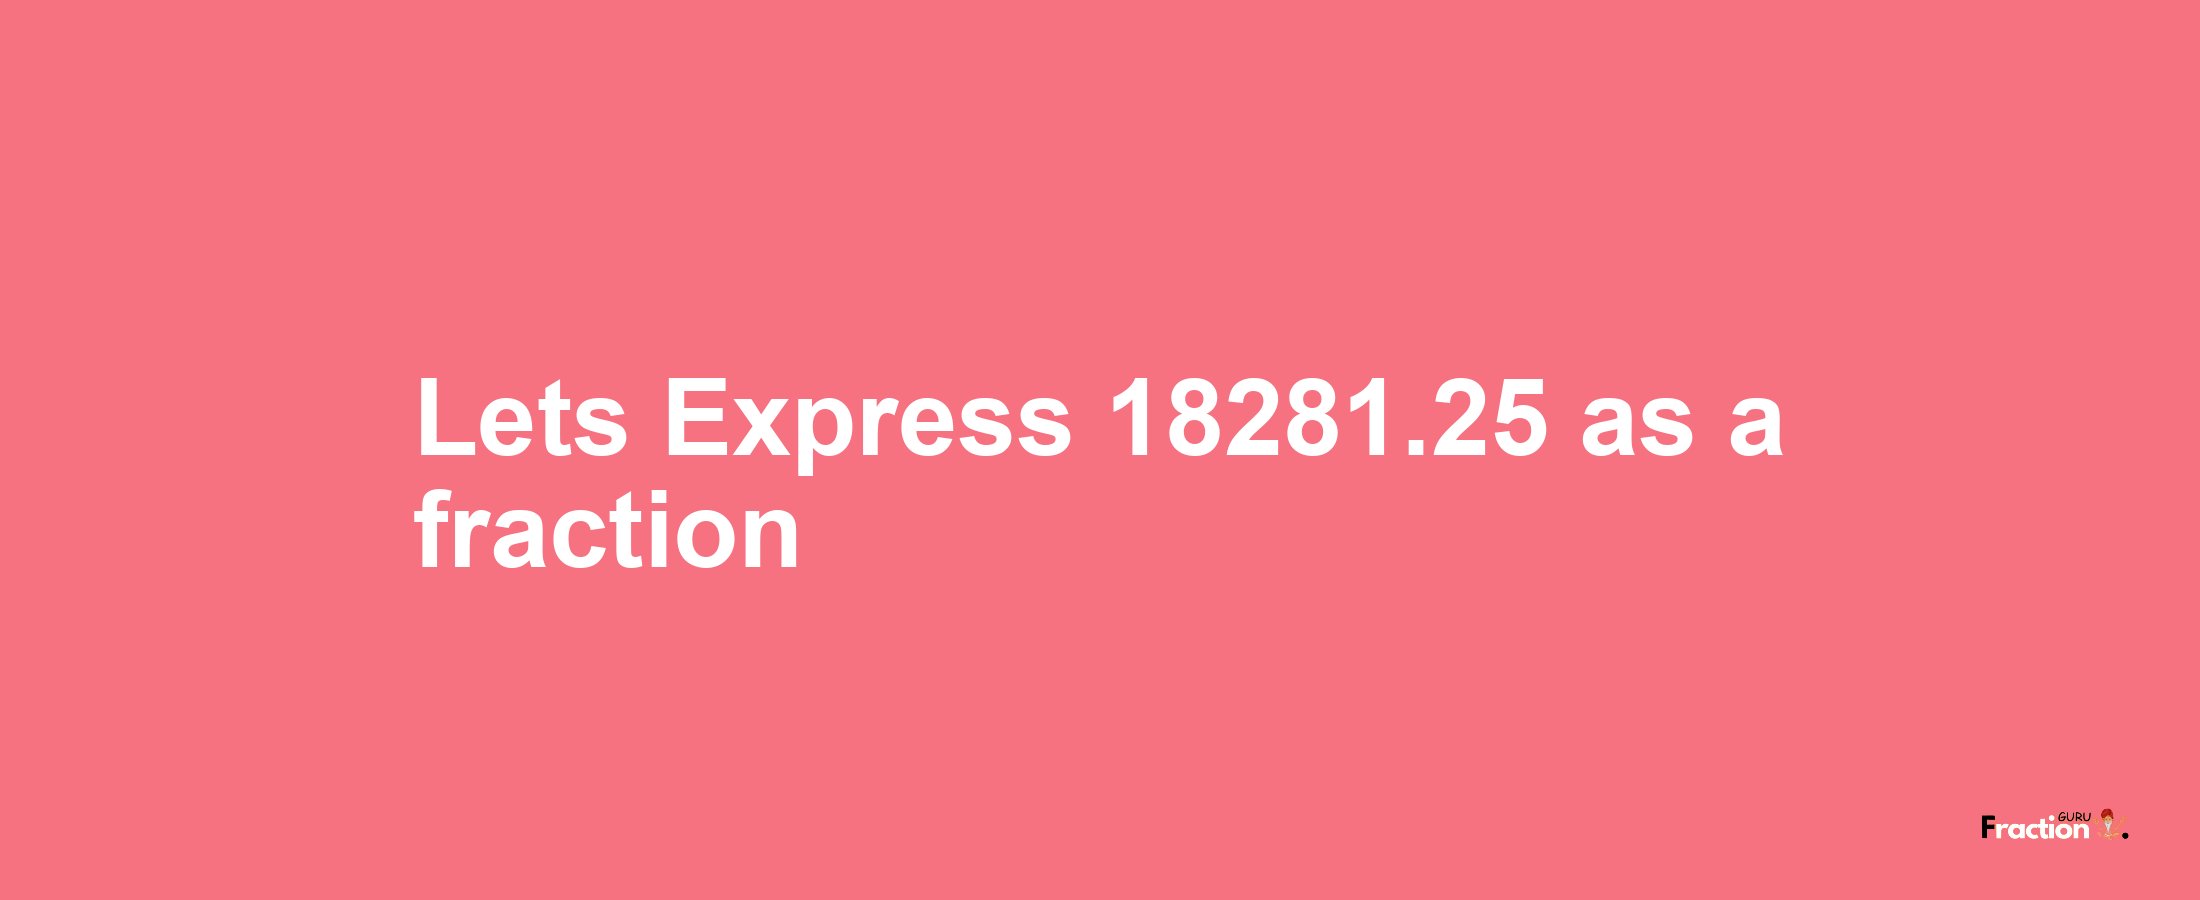 Lets Express 18281.25 as afraction